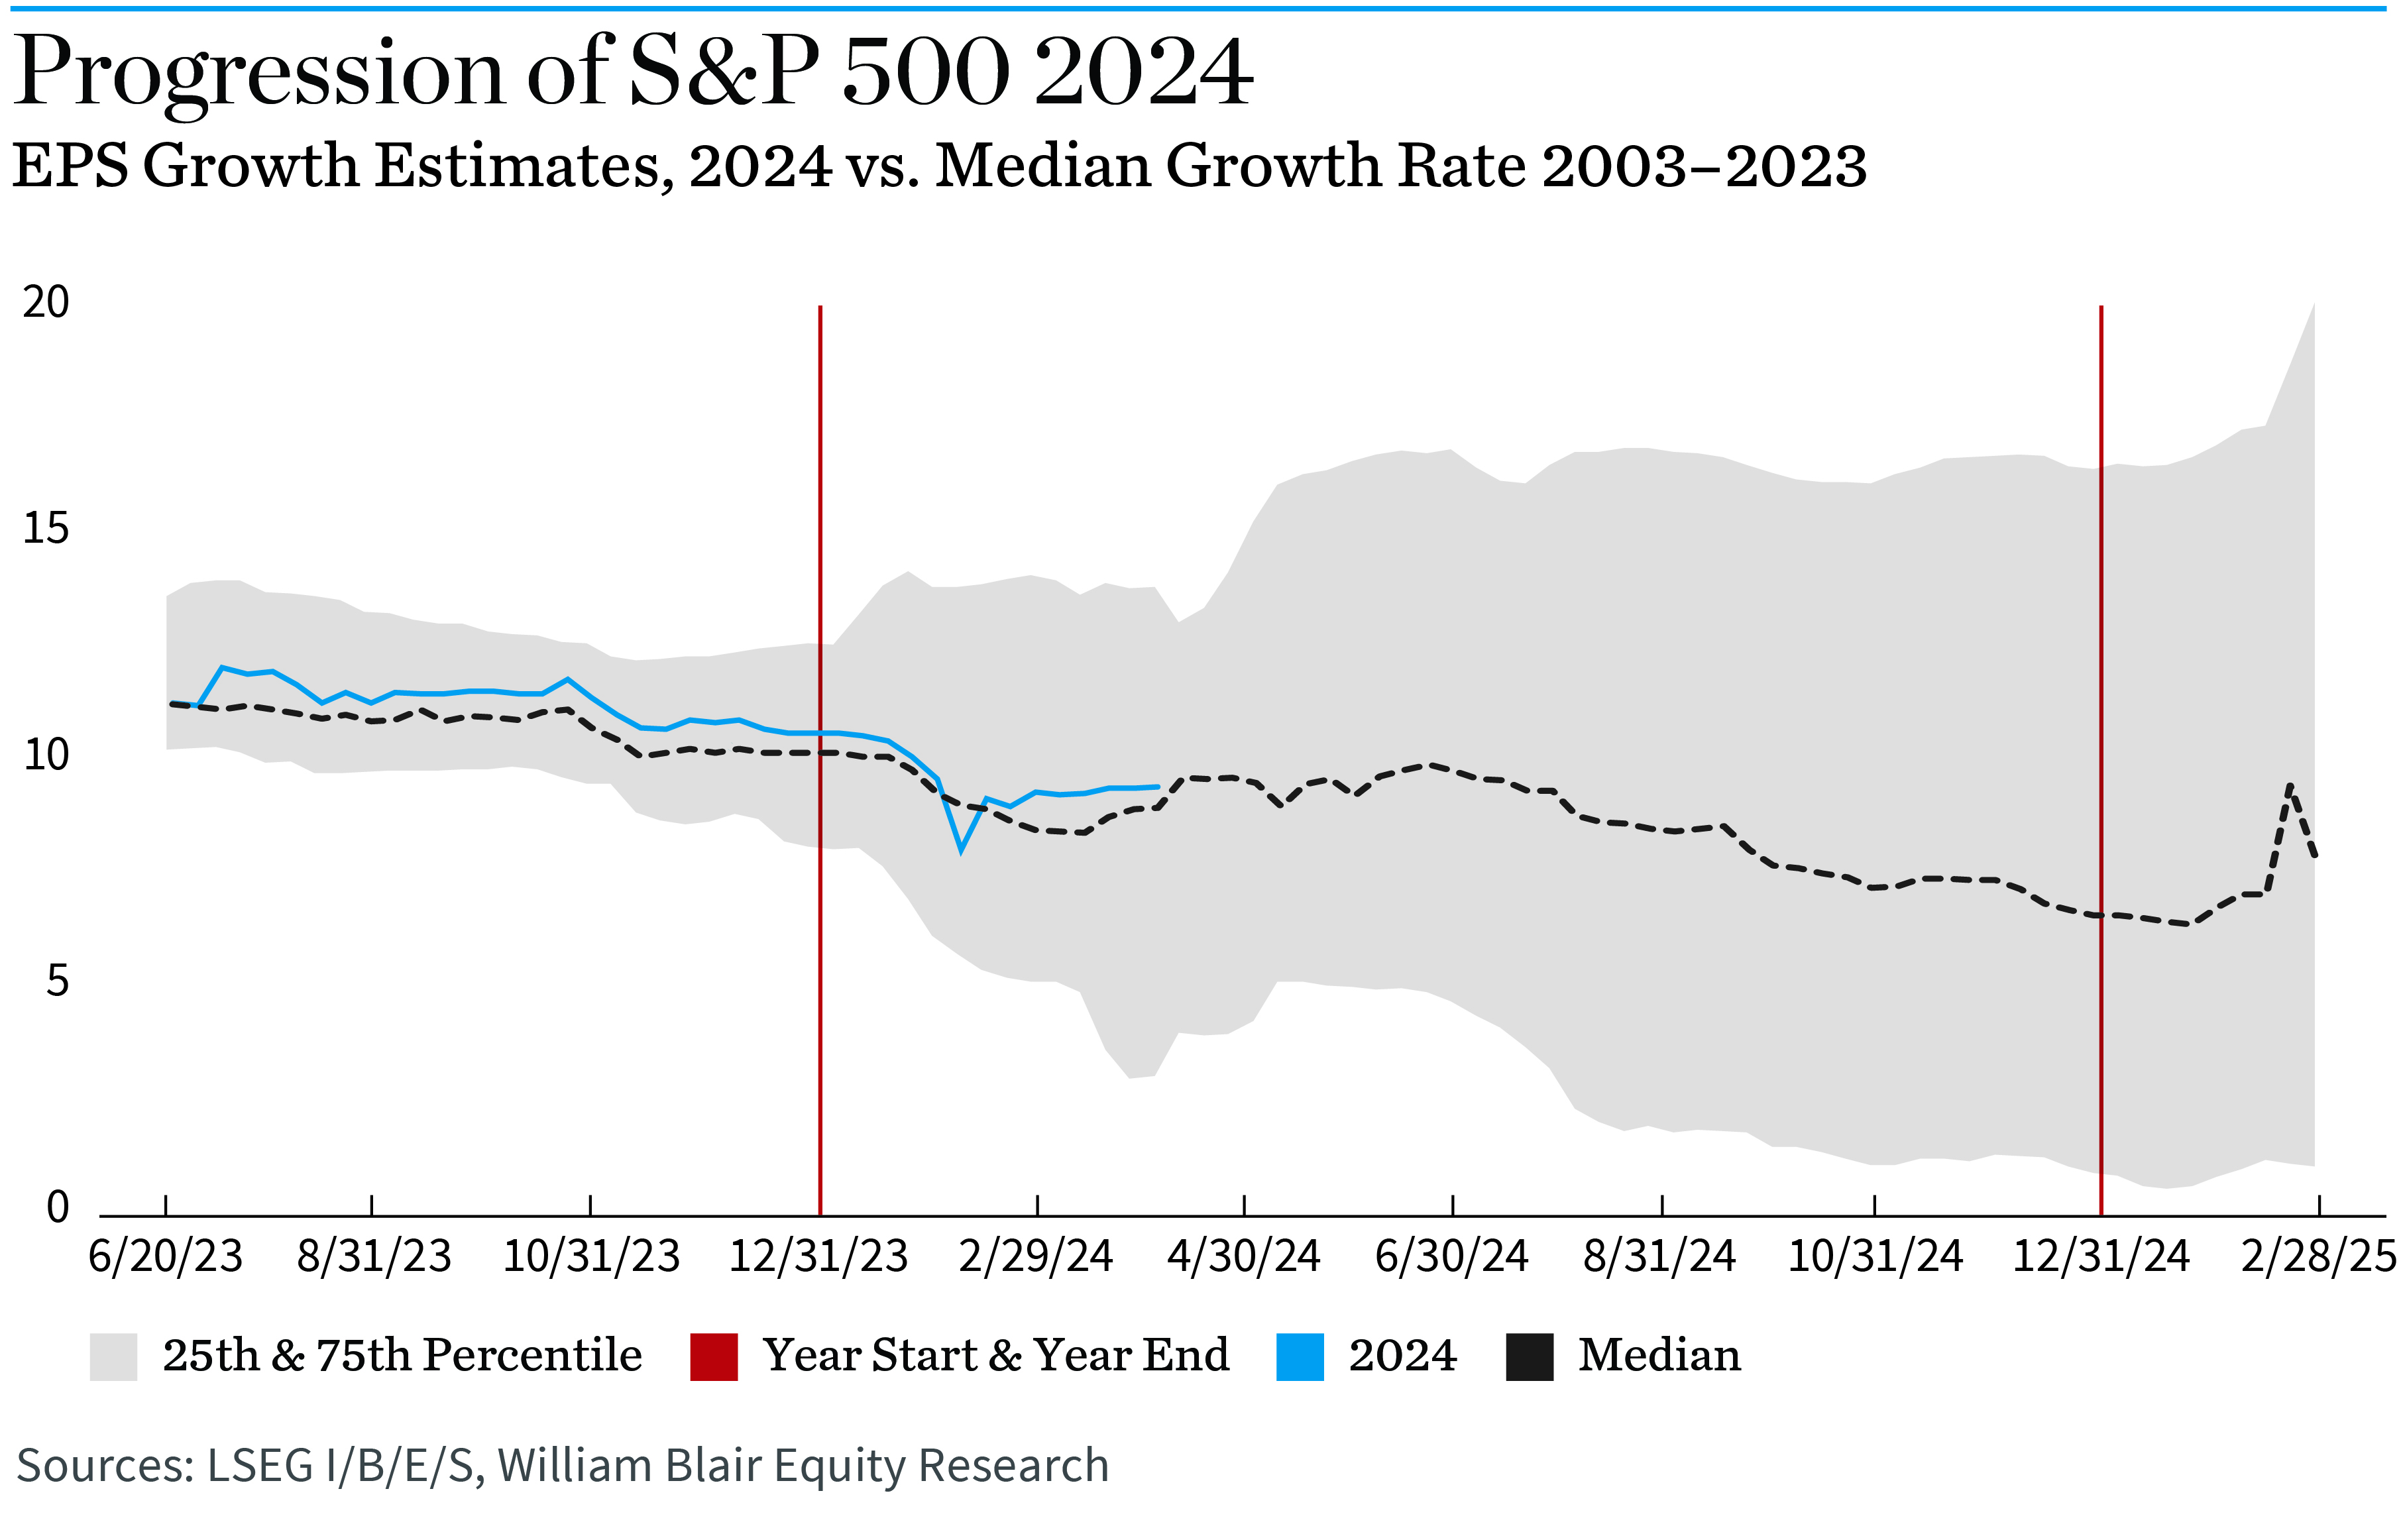 Progression of S&P 500 2024; EPS Growth Estimates, 2024 vs. Median Growth Rate 2003-2023